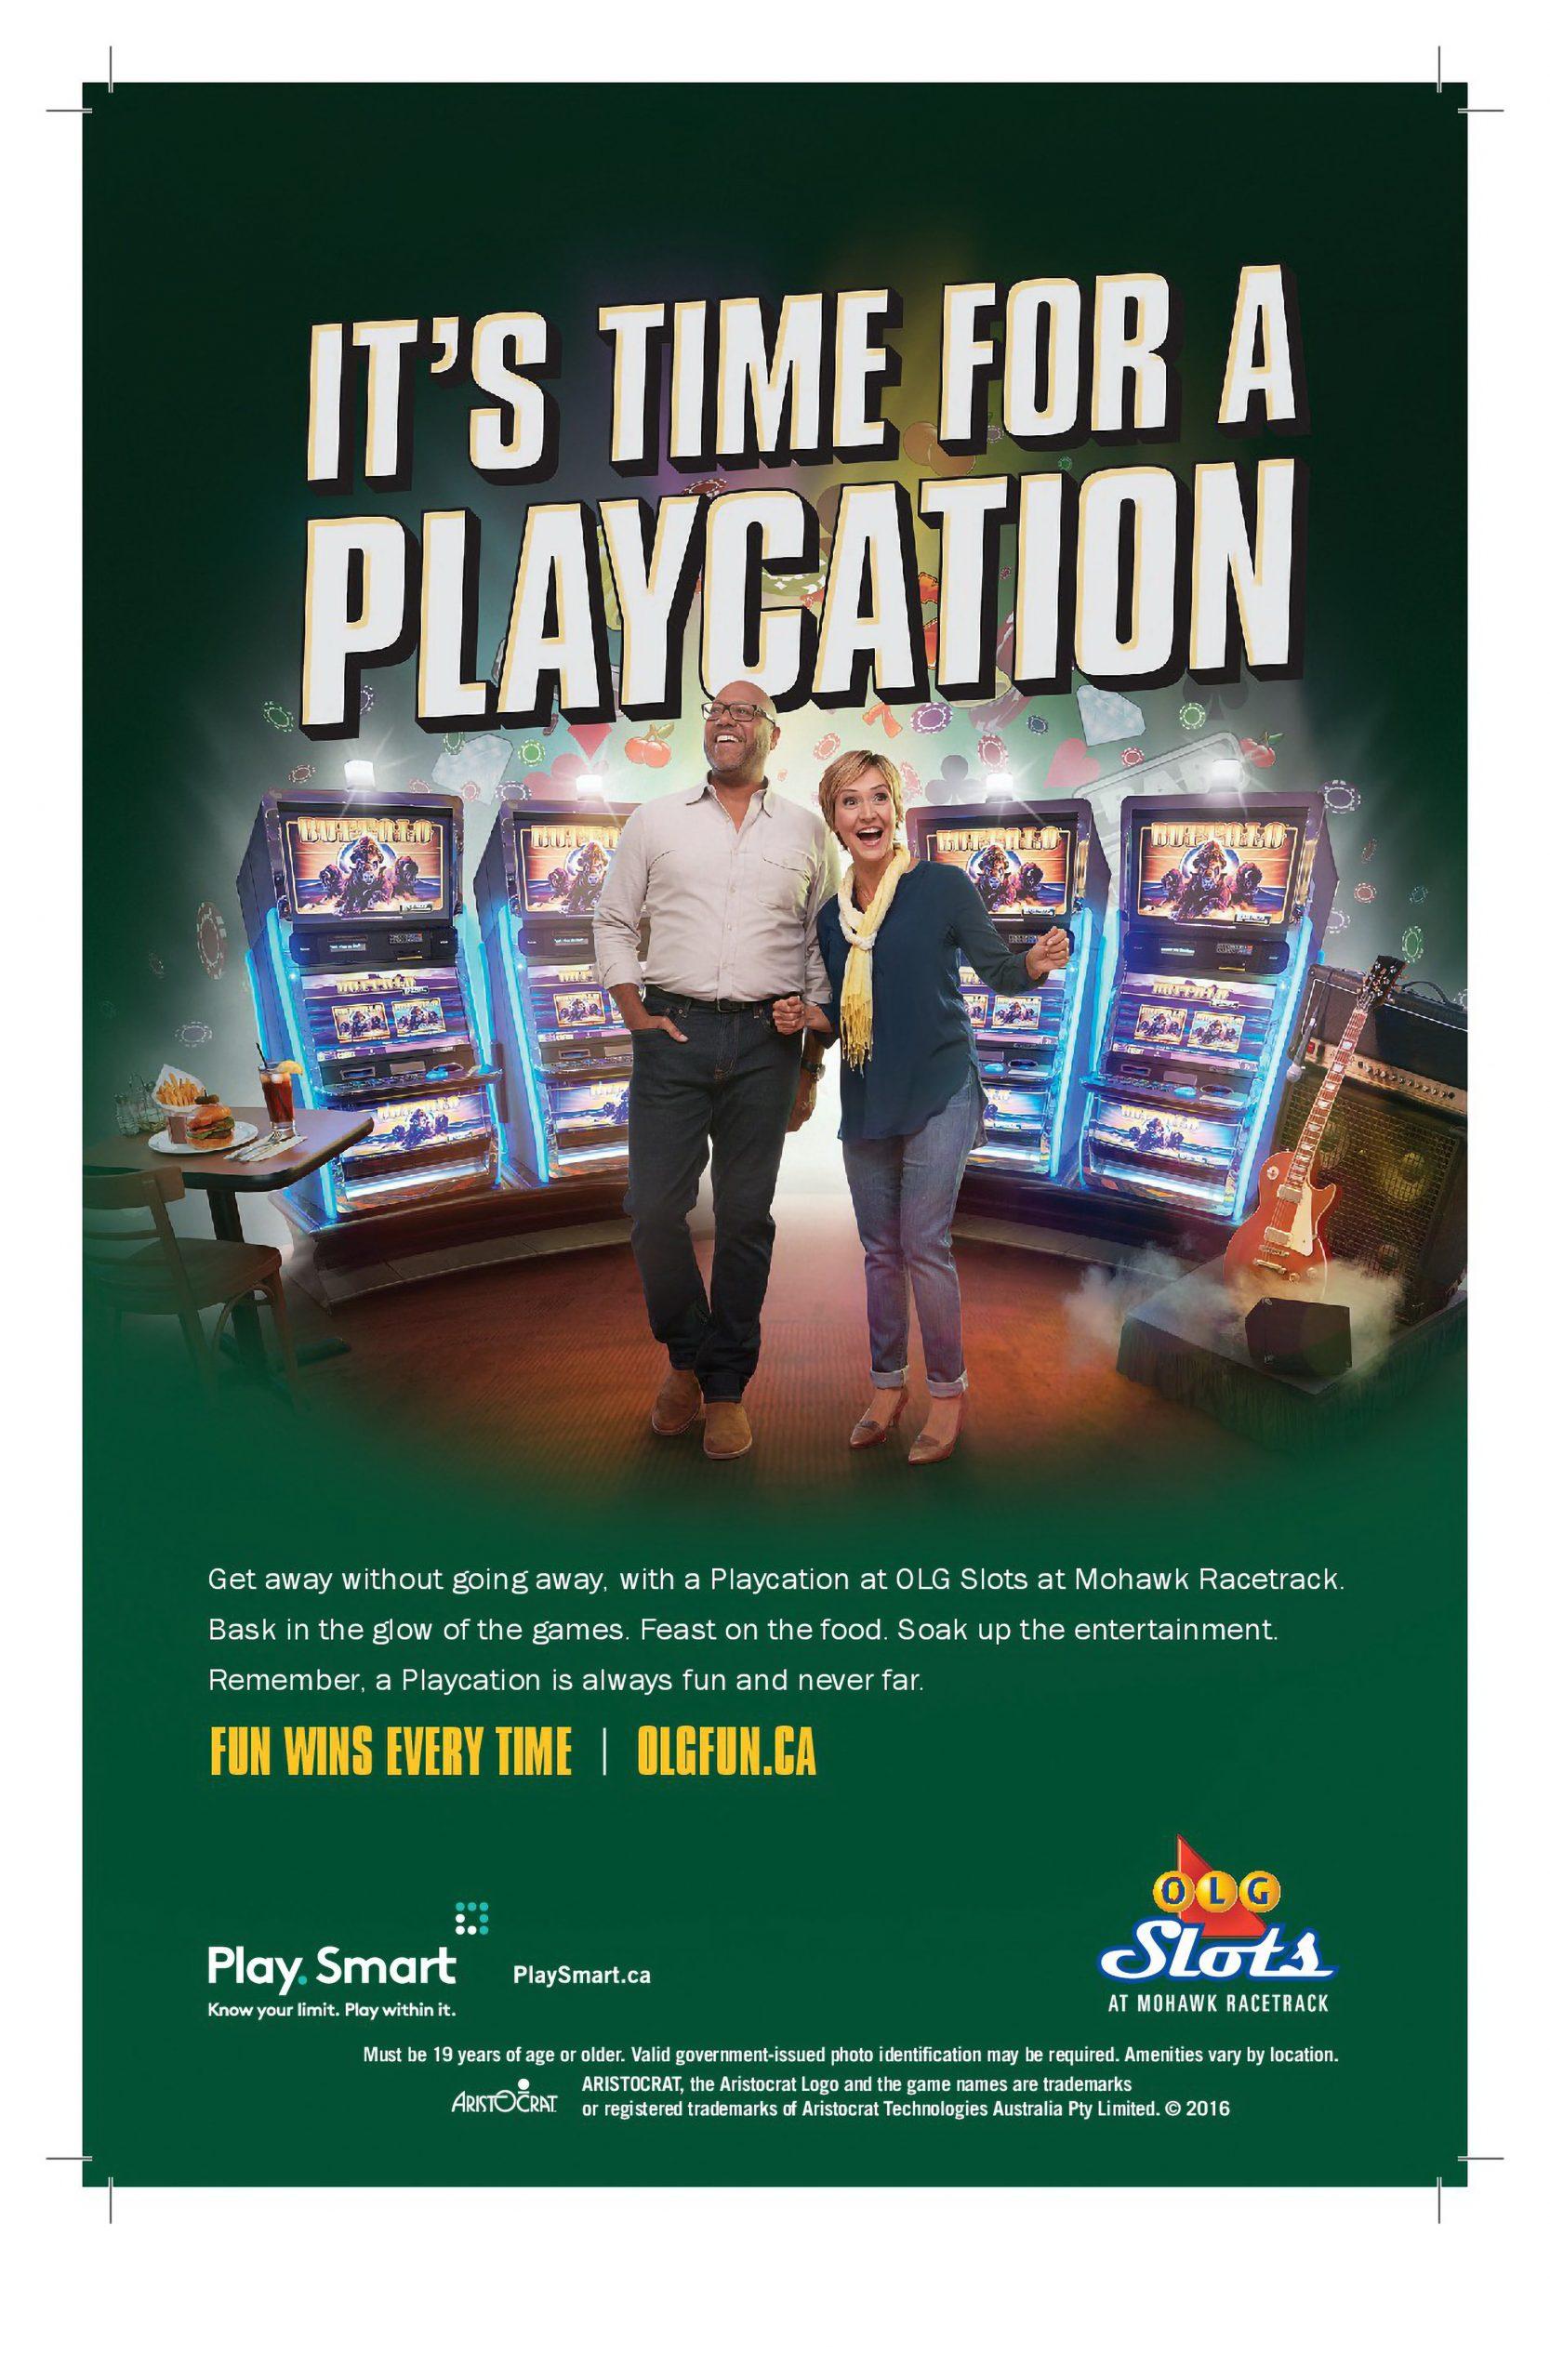 OLG Slot Ad - Man and woman excited amongst several slot machines and entertainment.